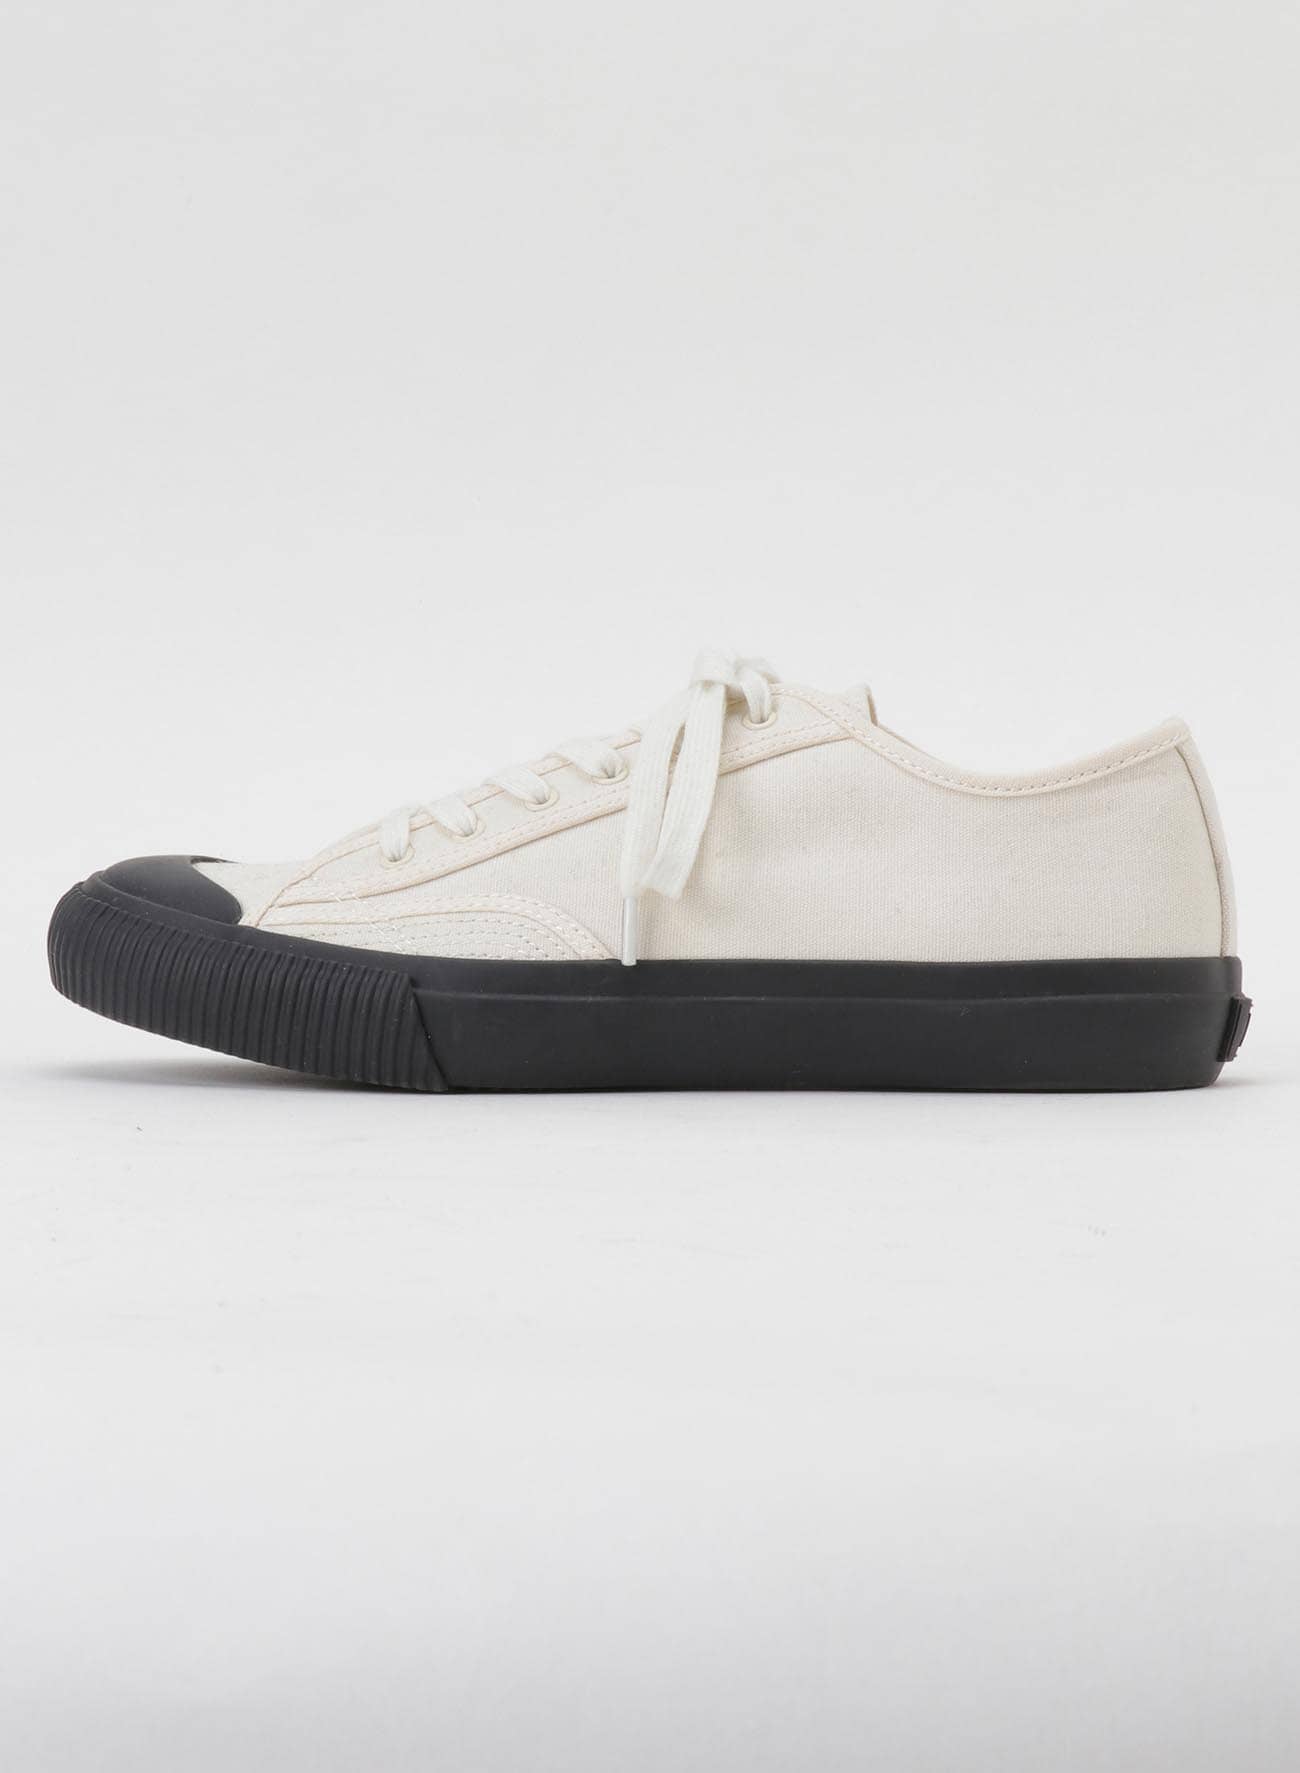 NO.9 CANVAS FLAT SNEAKERS(US 5.5 OFF WHITE): Vintage 1.1｜THE SHOP 